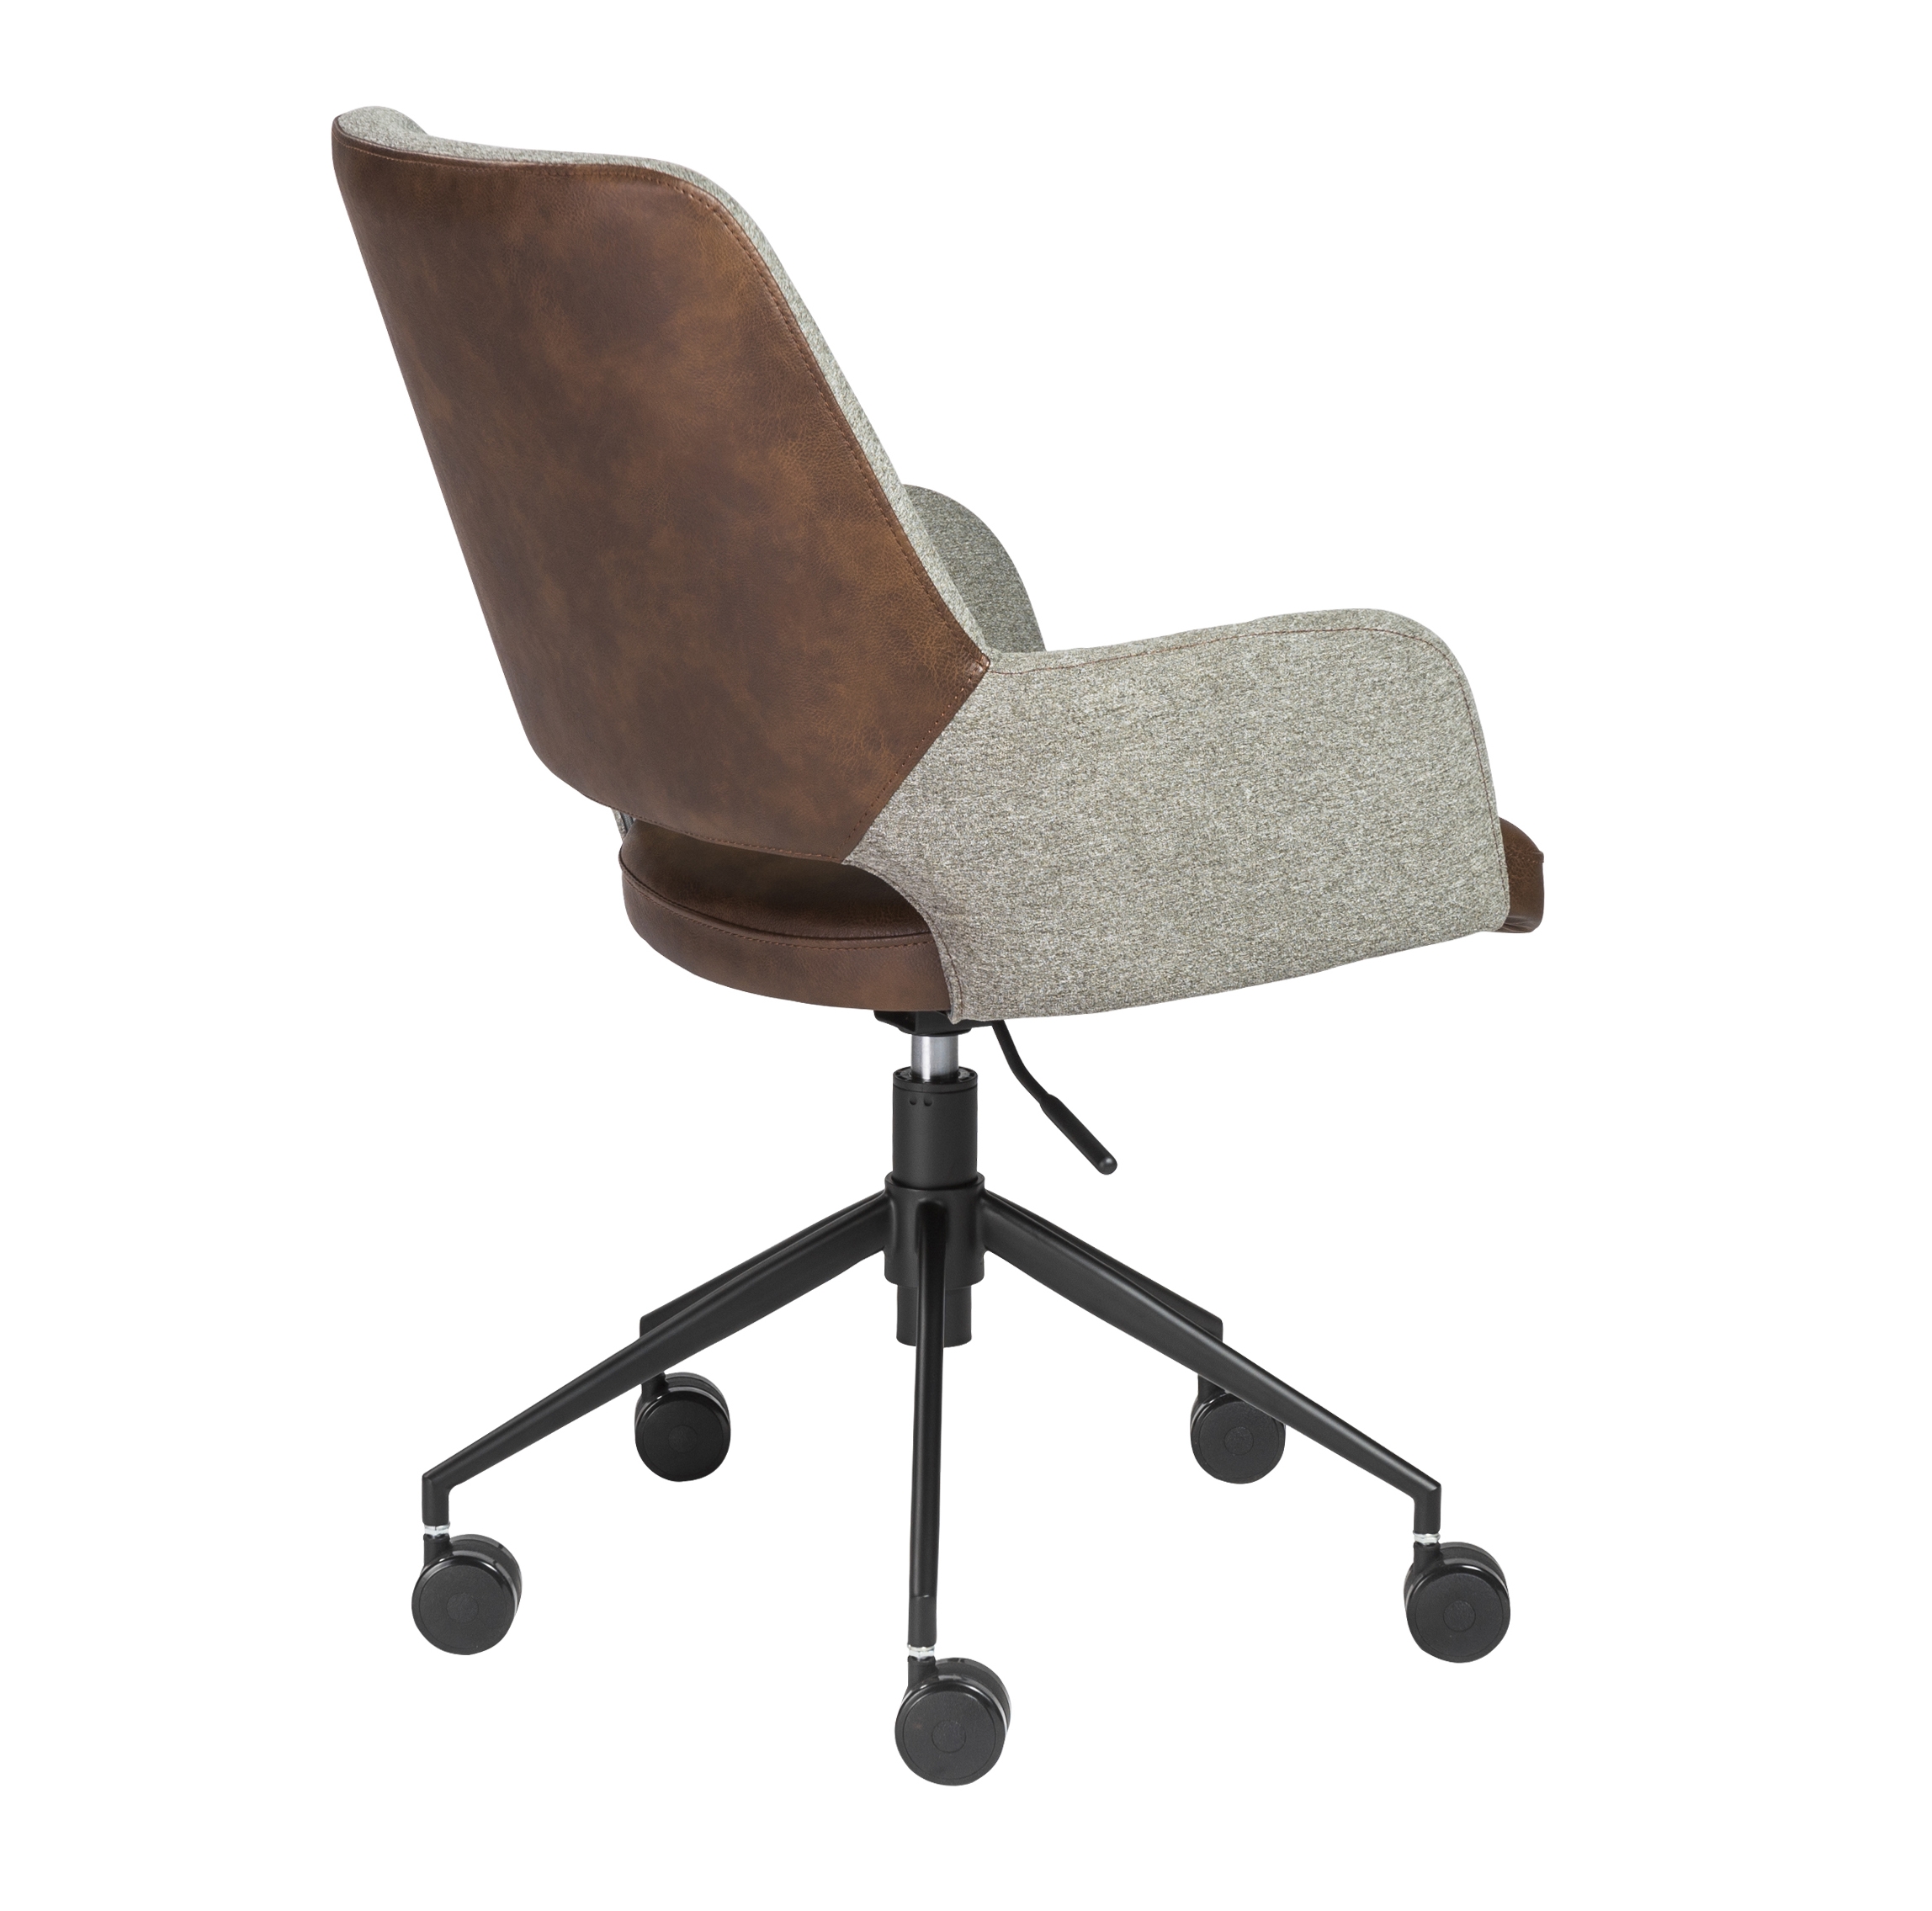 Randy Office Chair - Image 3